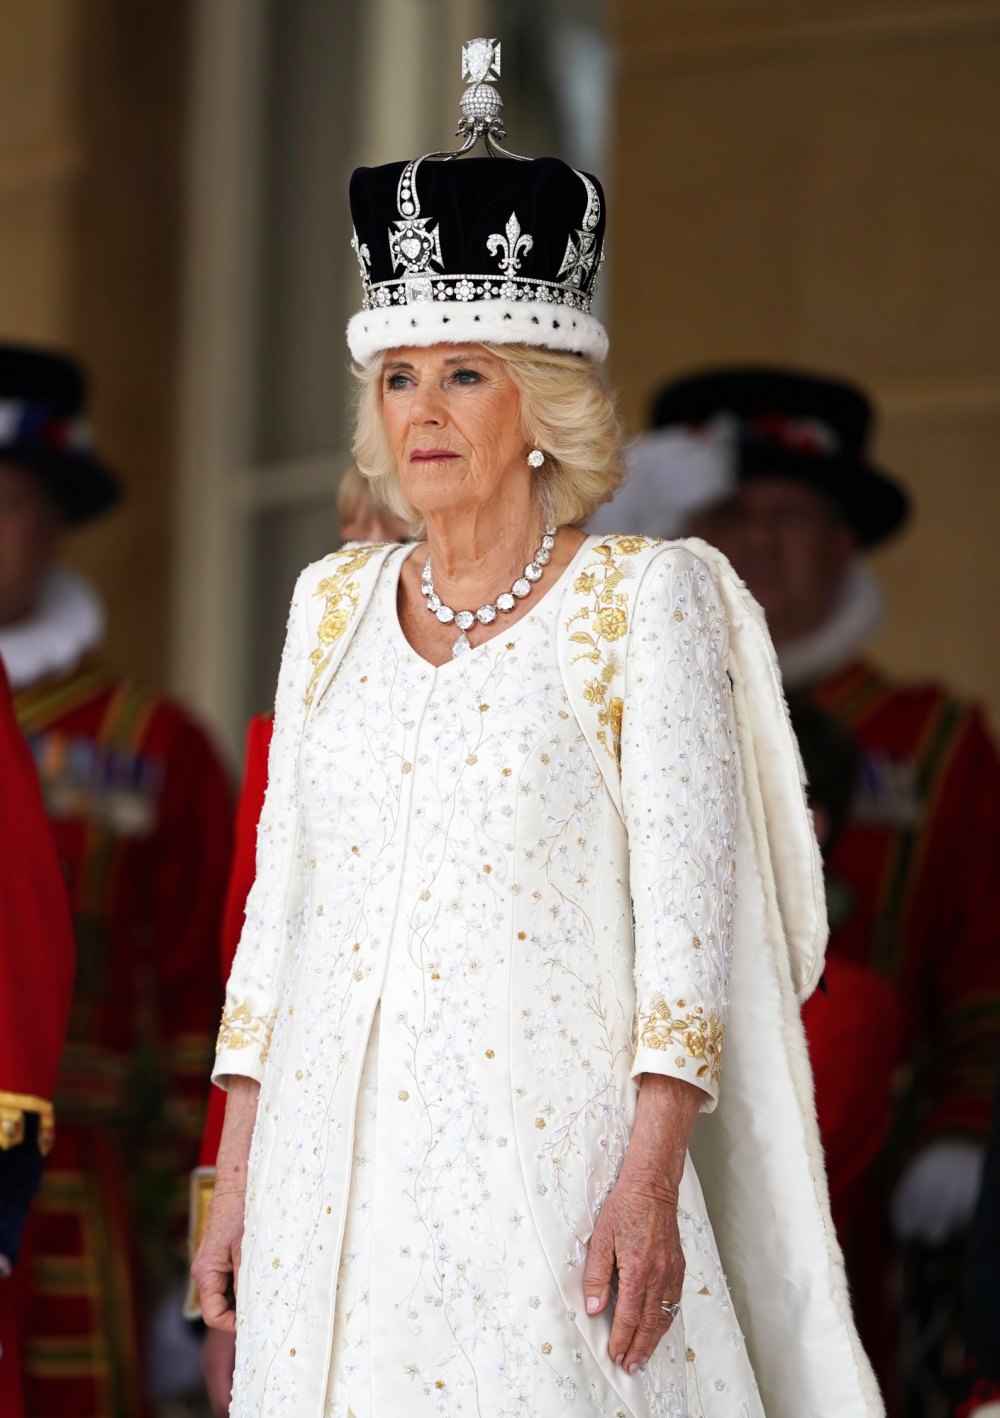 Queen Camilla completely re-wore her famous coronation dress